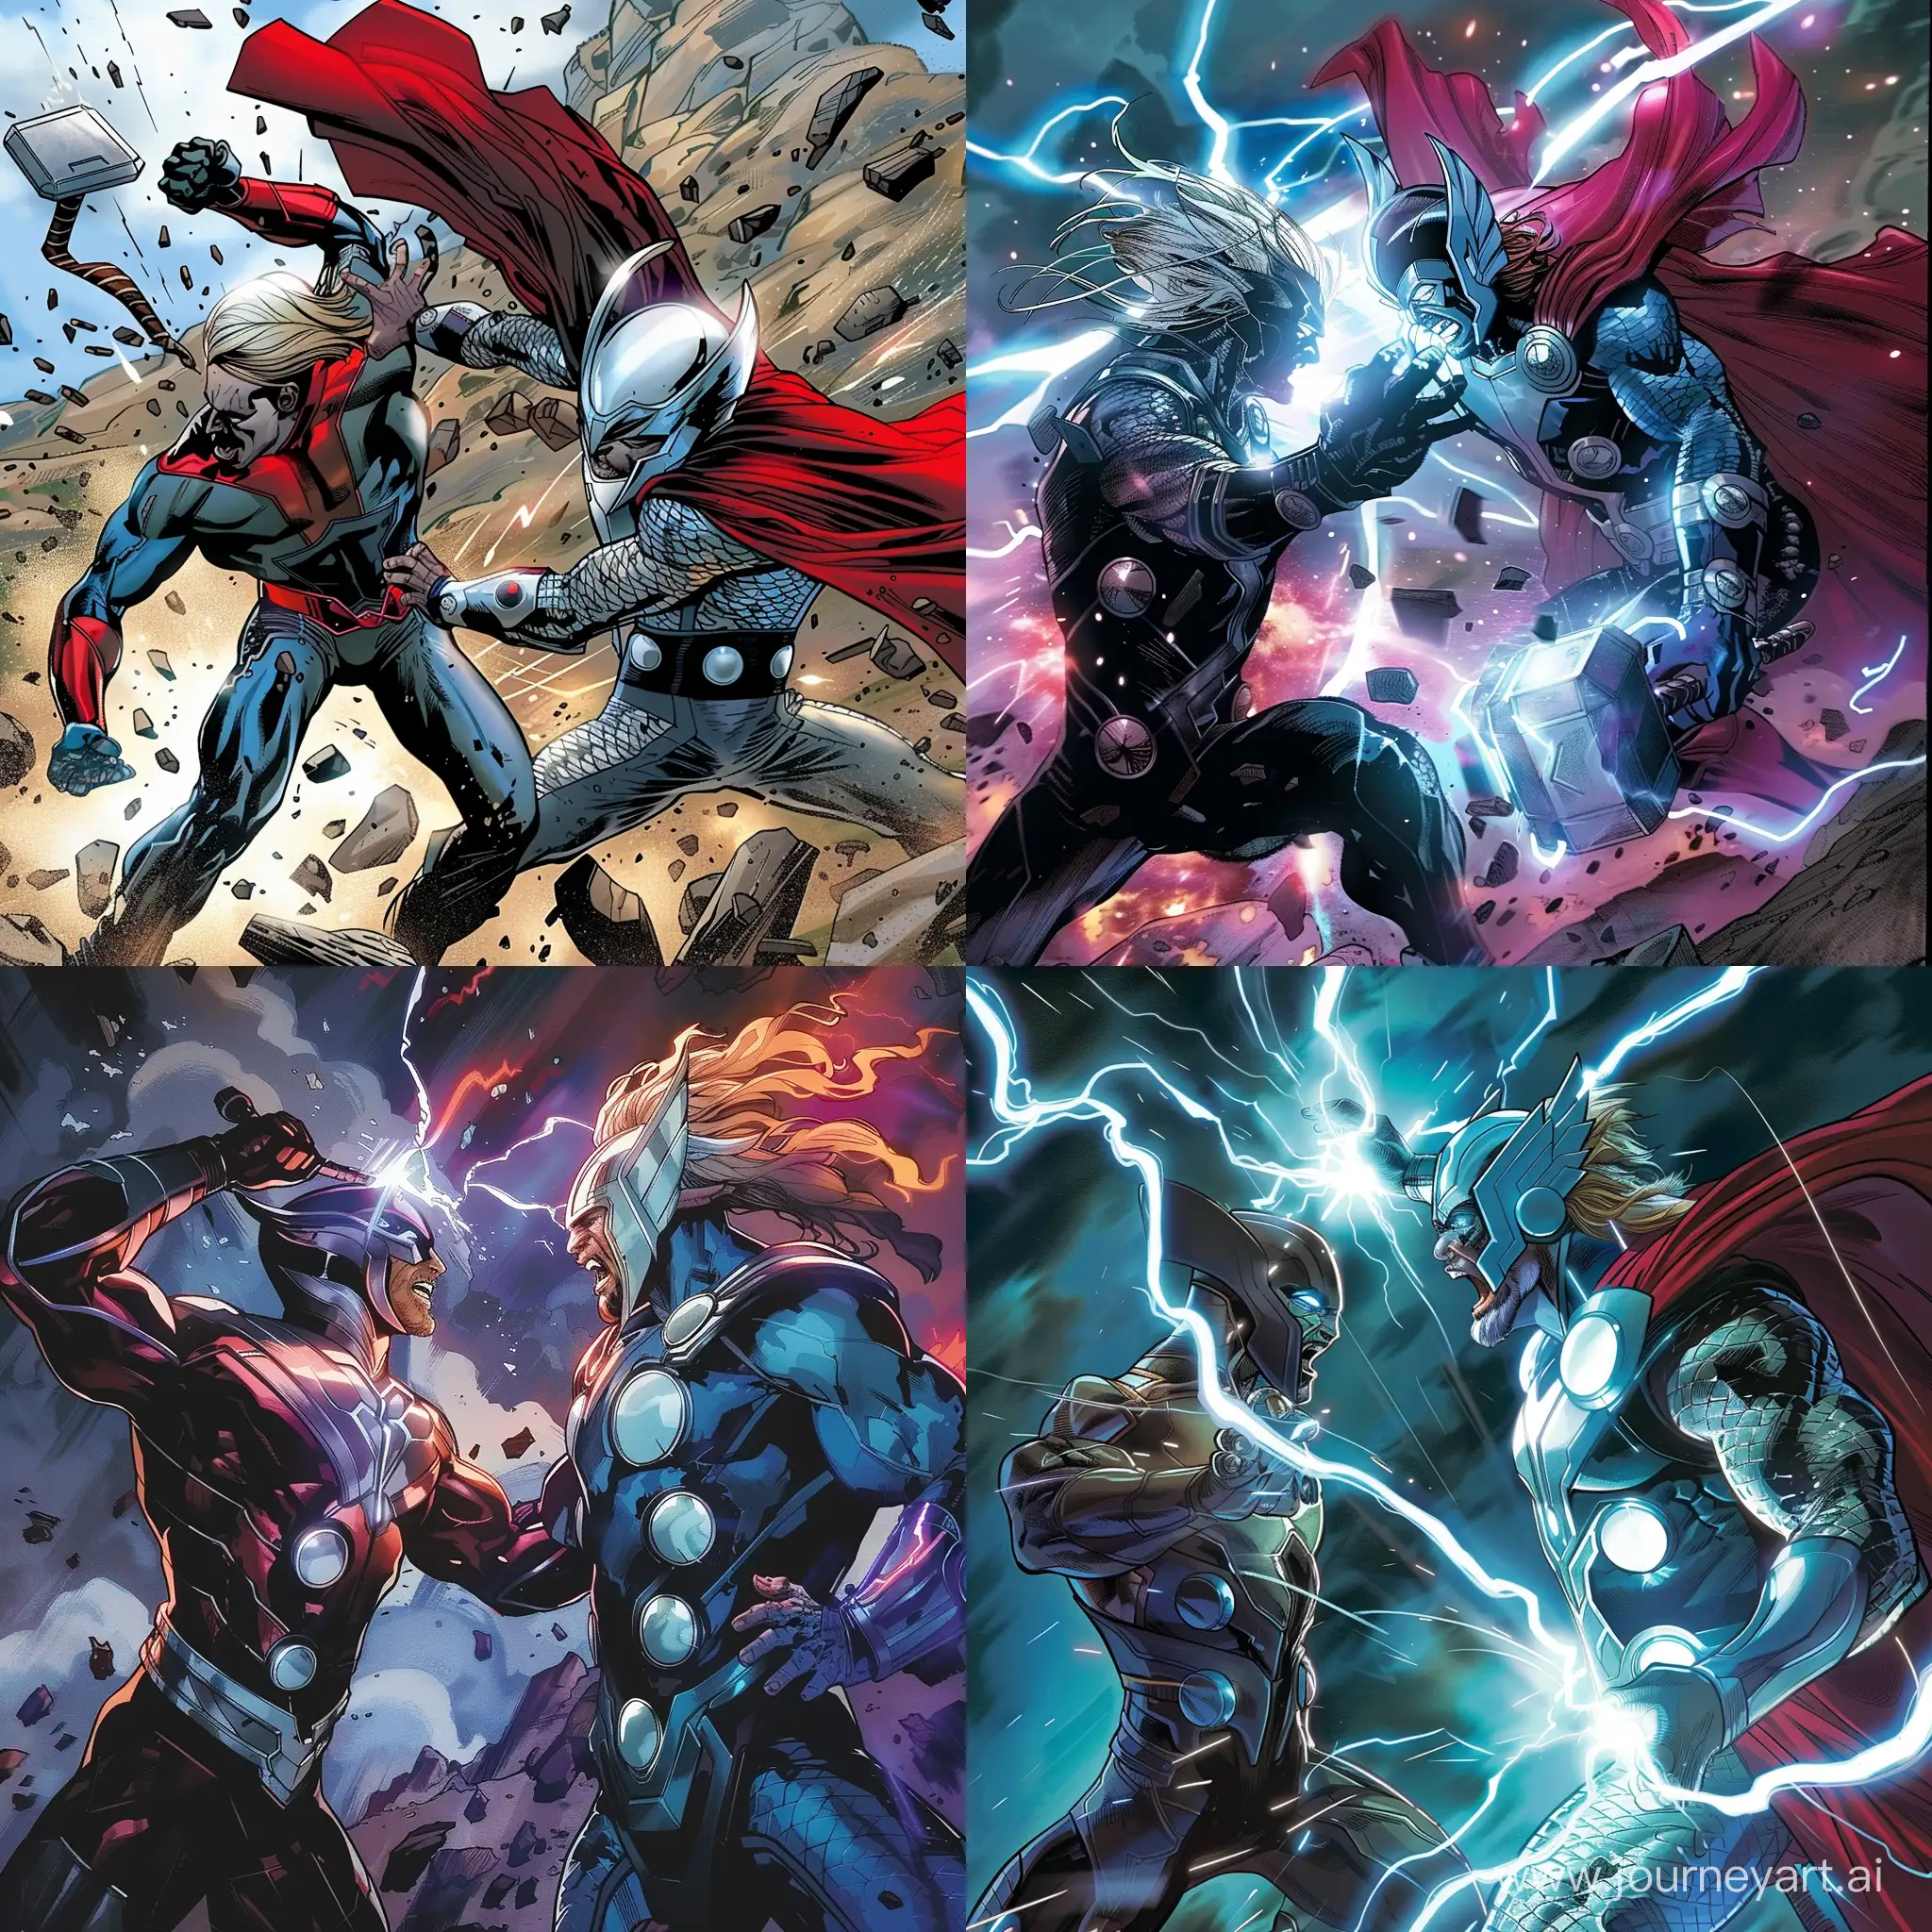 GenisVell-Battles-Thor-in-Epic-Confrontation